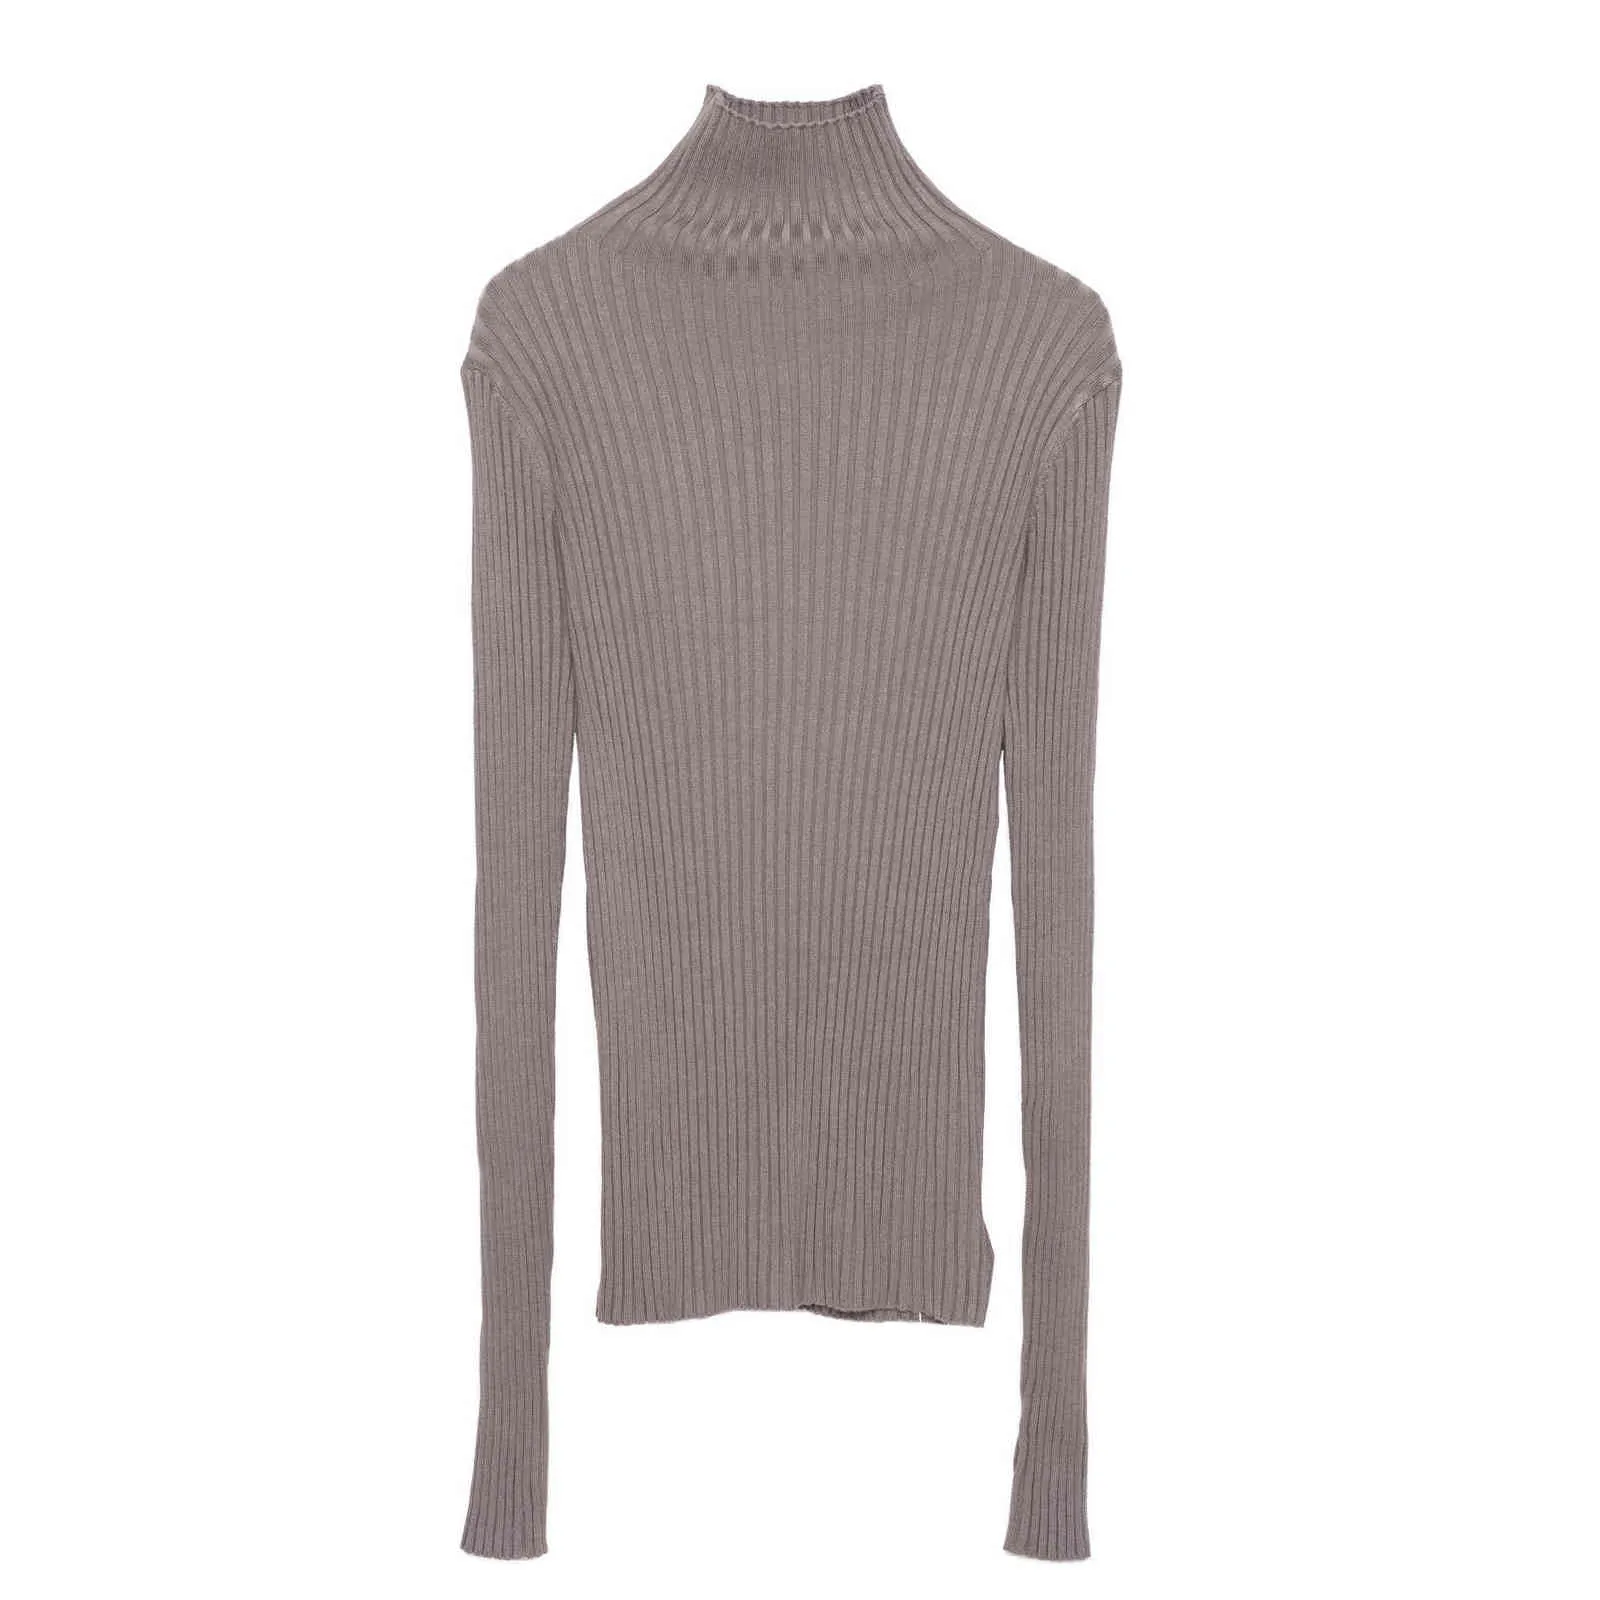 Ribbed Turtleneck Neck Sweater Women Cotton Mock Neck Sweaters Pullover Knitted Tops With Thumb Hole H1023